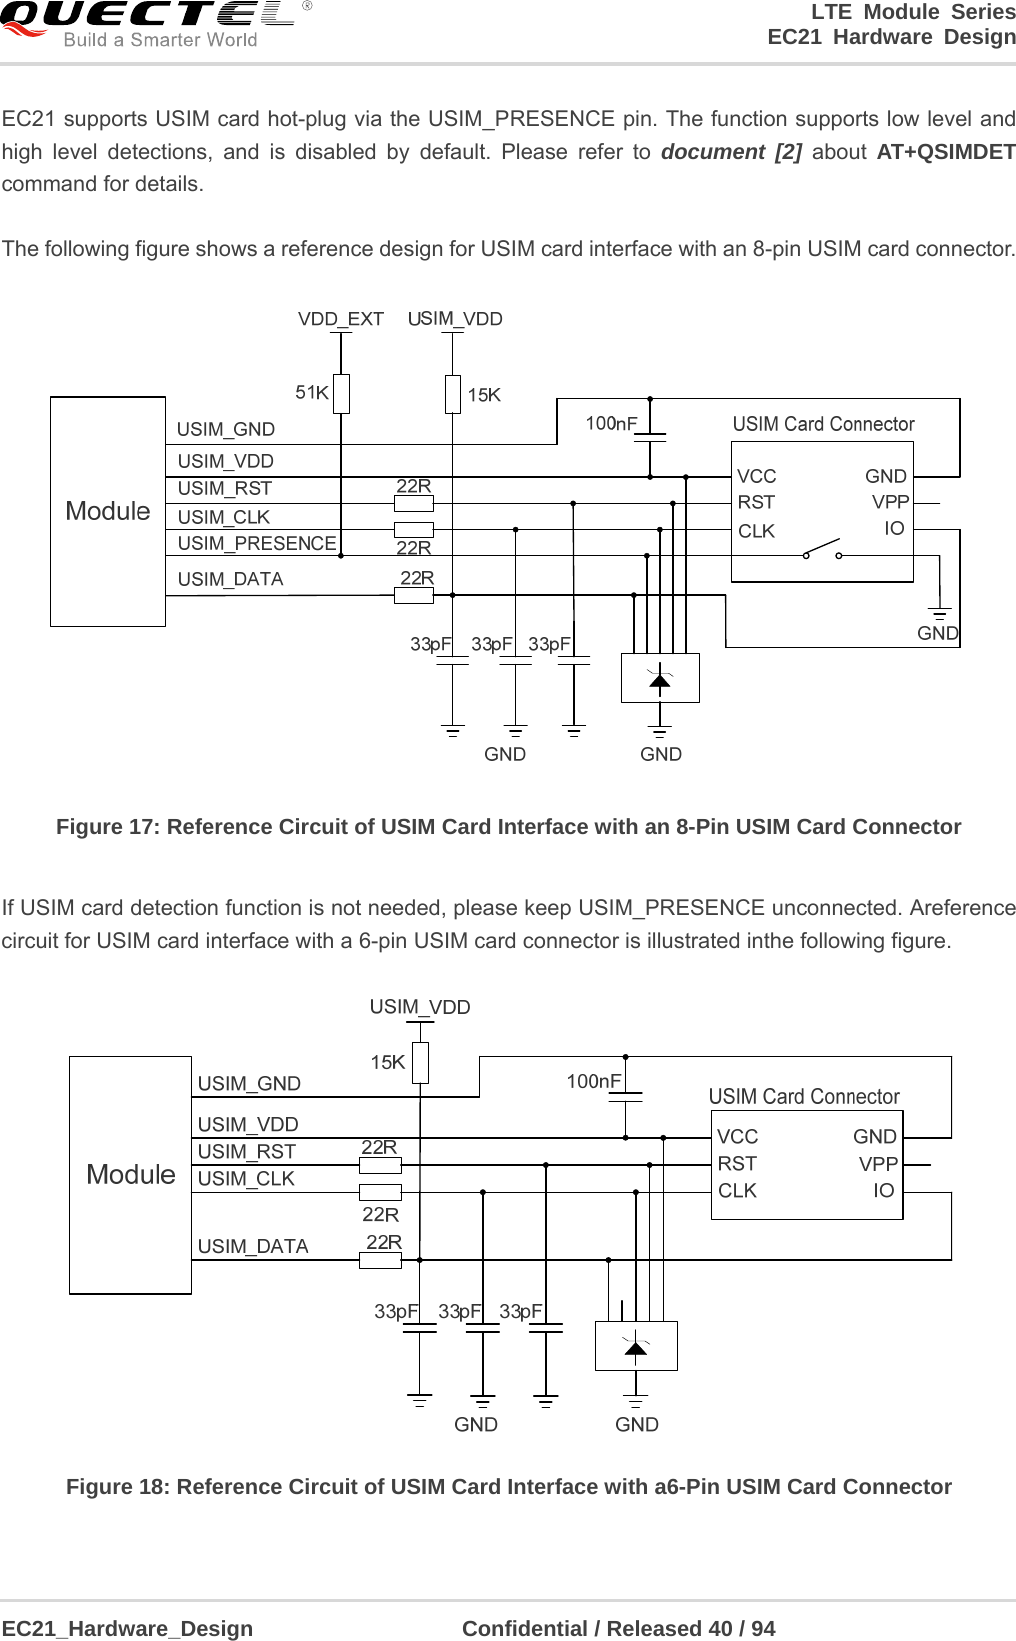 LTE Module Series                                                                 EC21 Hardware Design  EC21_Hardware_Design                   Confidential / Released 40 / 94    EC21 supports USIM card hot-plug via the USIM_PRESENCE pin. The function supports low level and high level detections, and is disabled by default. Please refer to document [2] about AT+QSIMDET command for details.  The following figure shows a reference design for USIM card interface with an 8-pin USIM card connector.  Figure 17: Reference Circuit of USIM Card Interface with an 8-Pin USIM Card Connector  If USIM card detection function is not needed, please keep USIM_PRESENCE unconnected. Areference circuit for USIM card interface with a 6-pin USIM card connector is illustrated inthe following figure.  Figure 18: Reference Circuit of USIM Card Interface with a6-Pin USIM Card Connector  